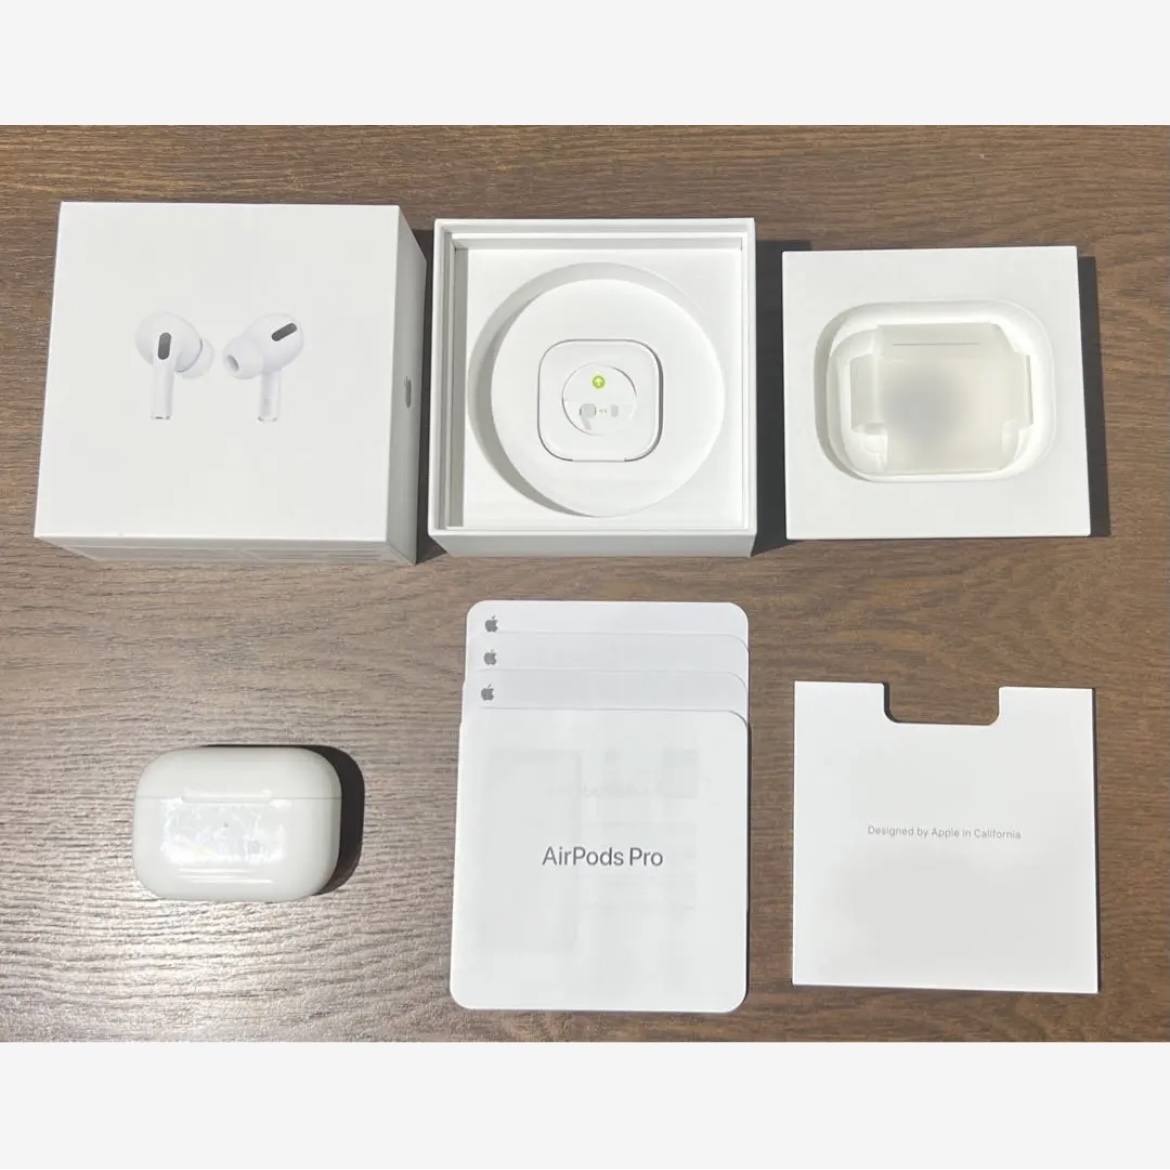 AirPods Pro 第1世代 刻印あり_AirPods Pro 第1世代 刻印あり